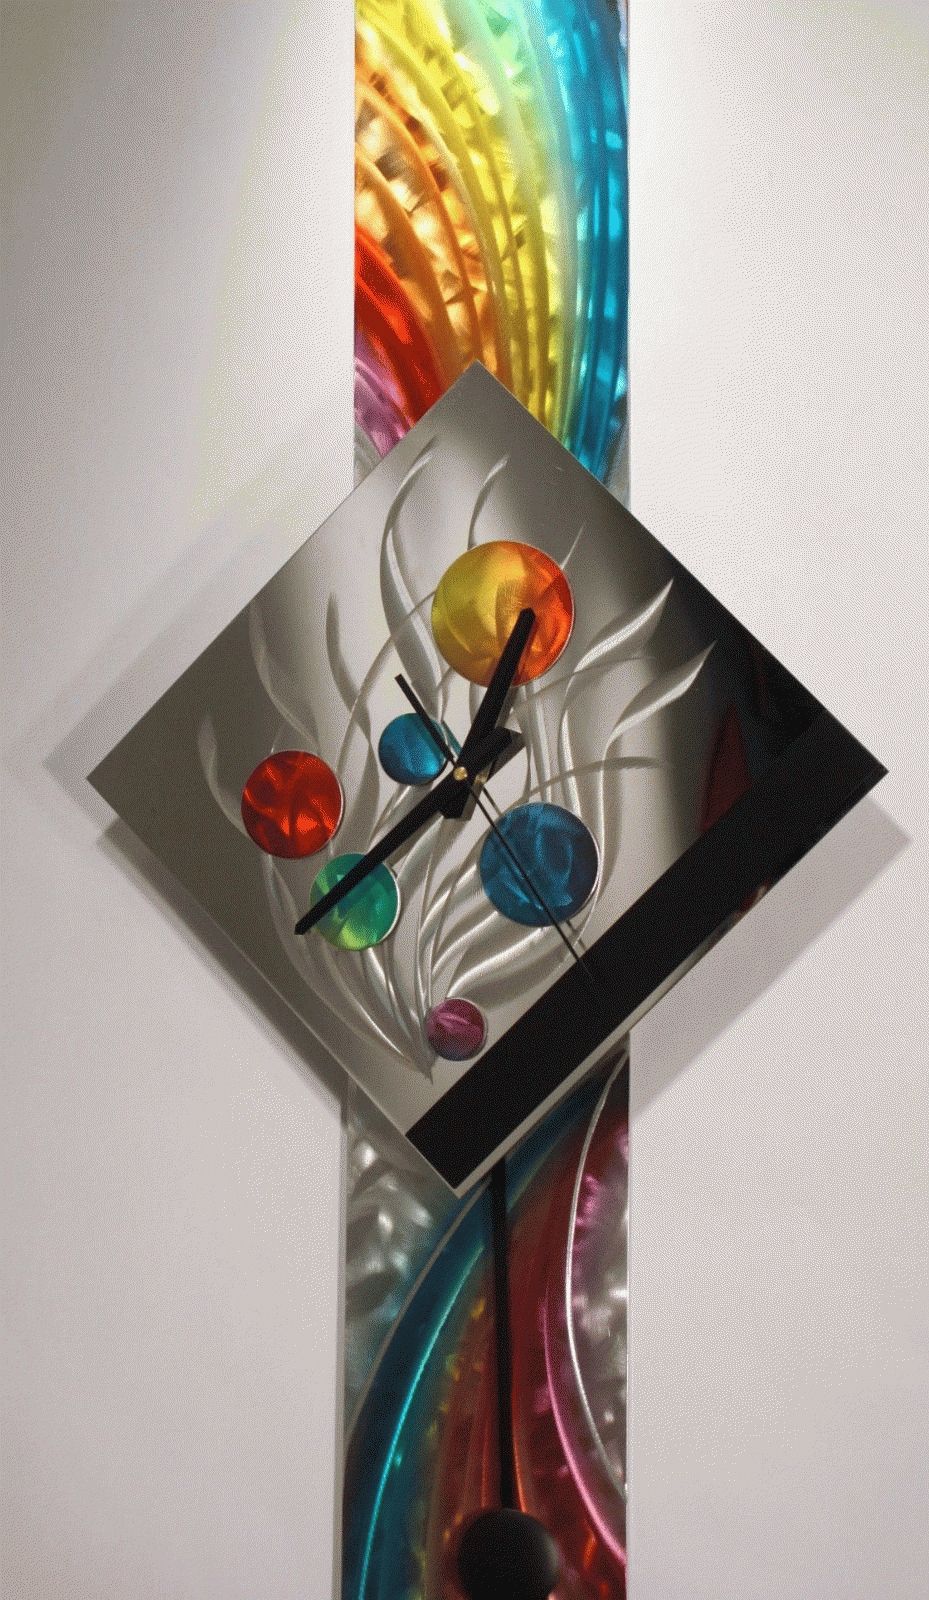 The Best Glass And Metal Wall Art Pertaining To Latest Glass Abstract Wall Art (Gallery 13 of 20)